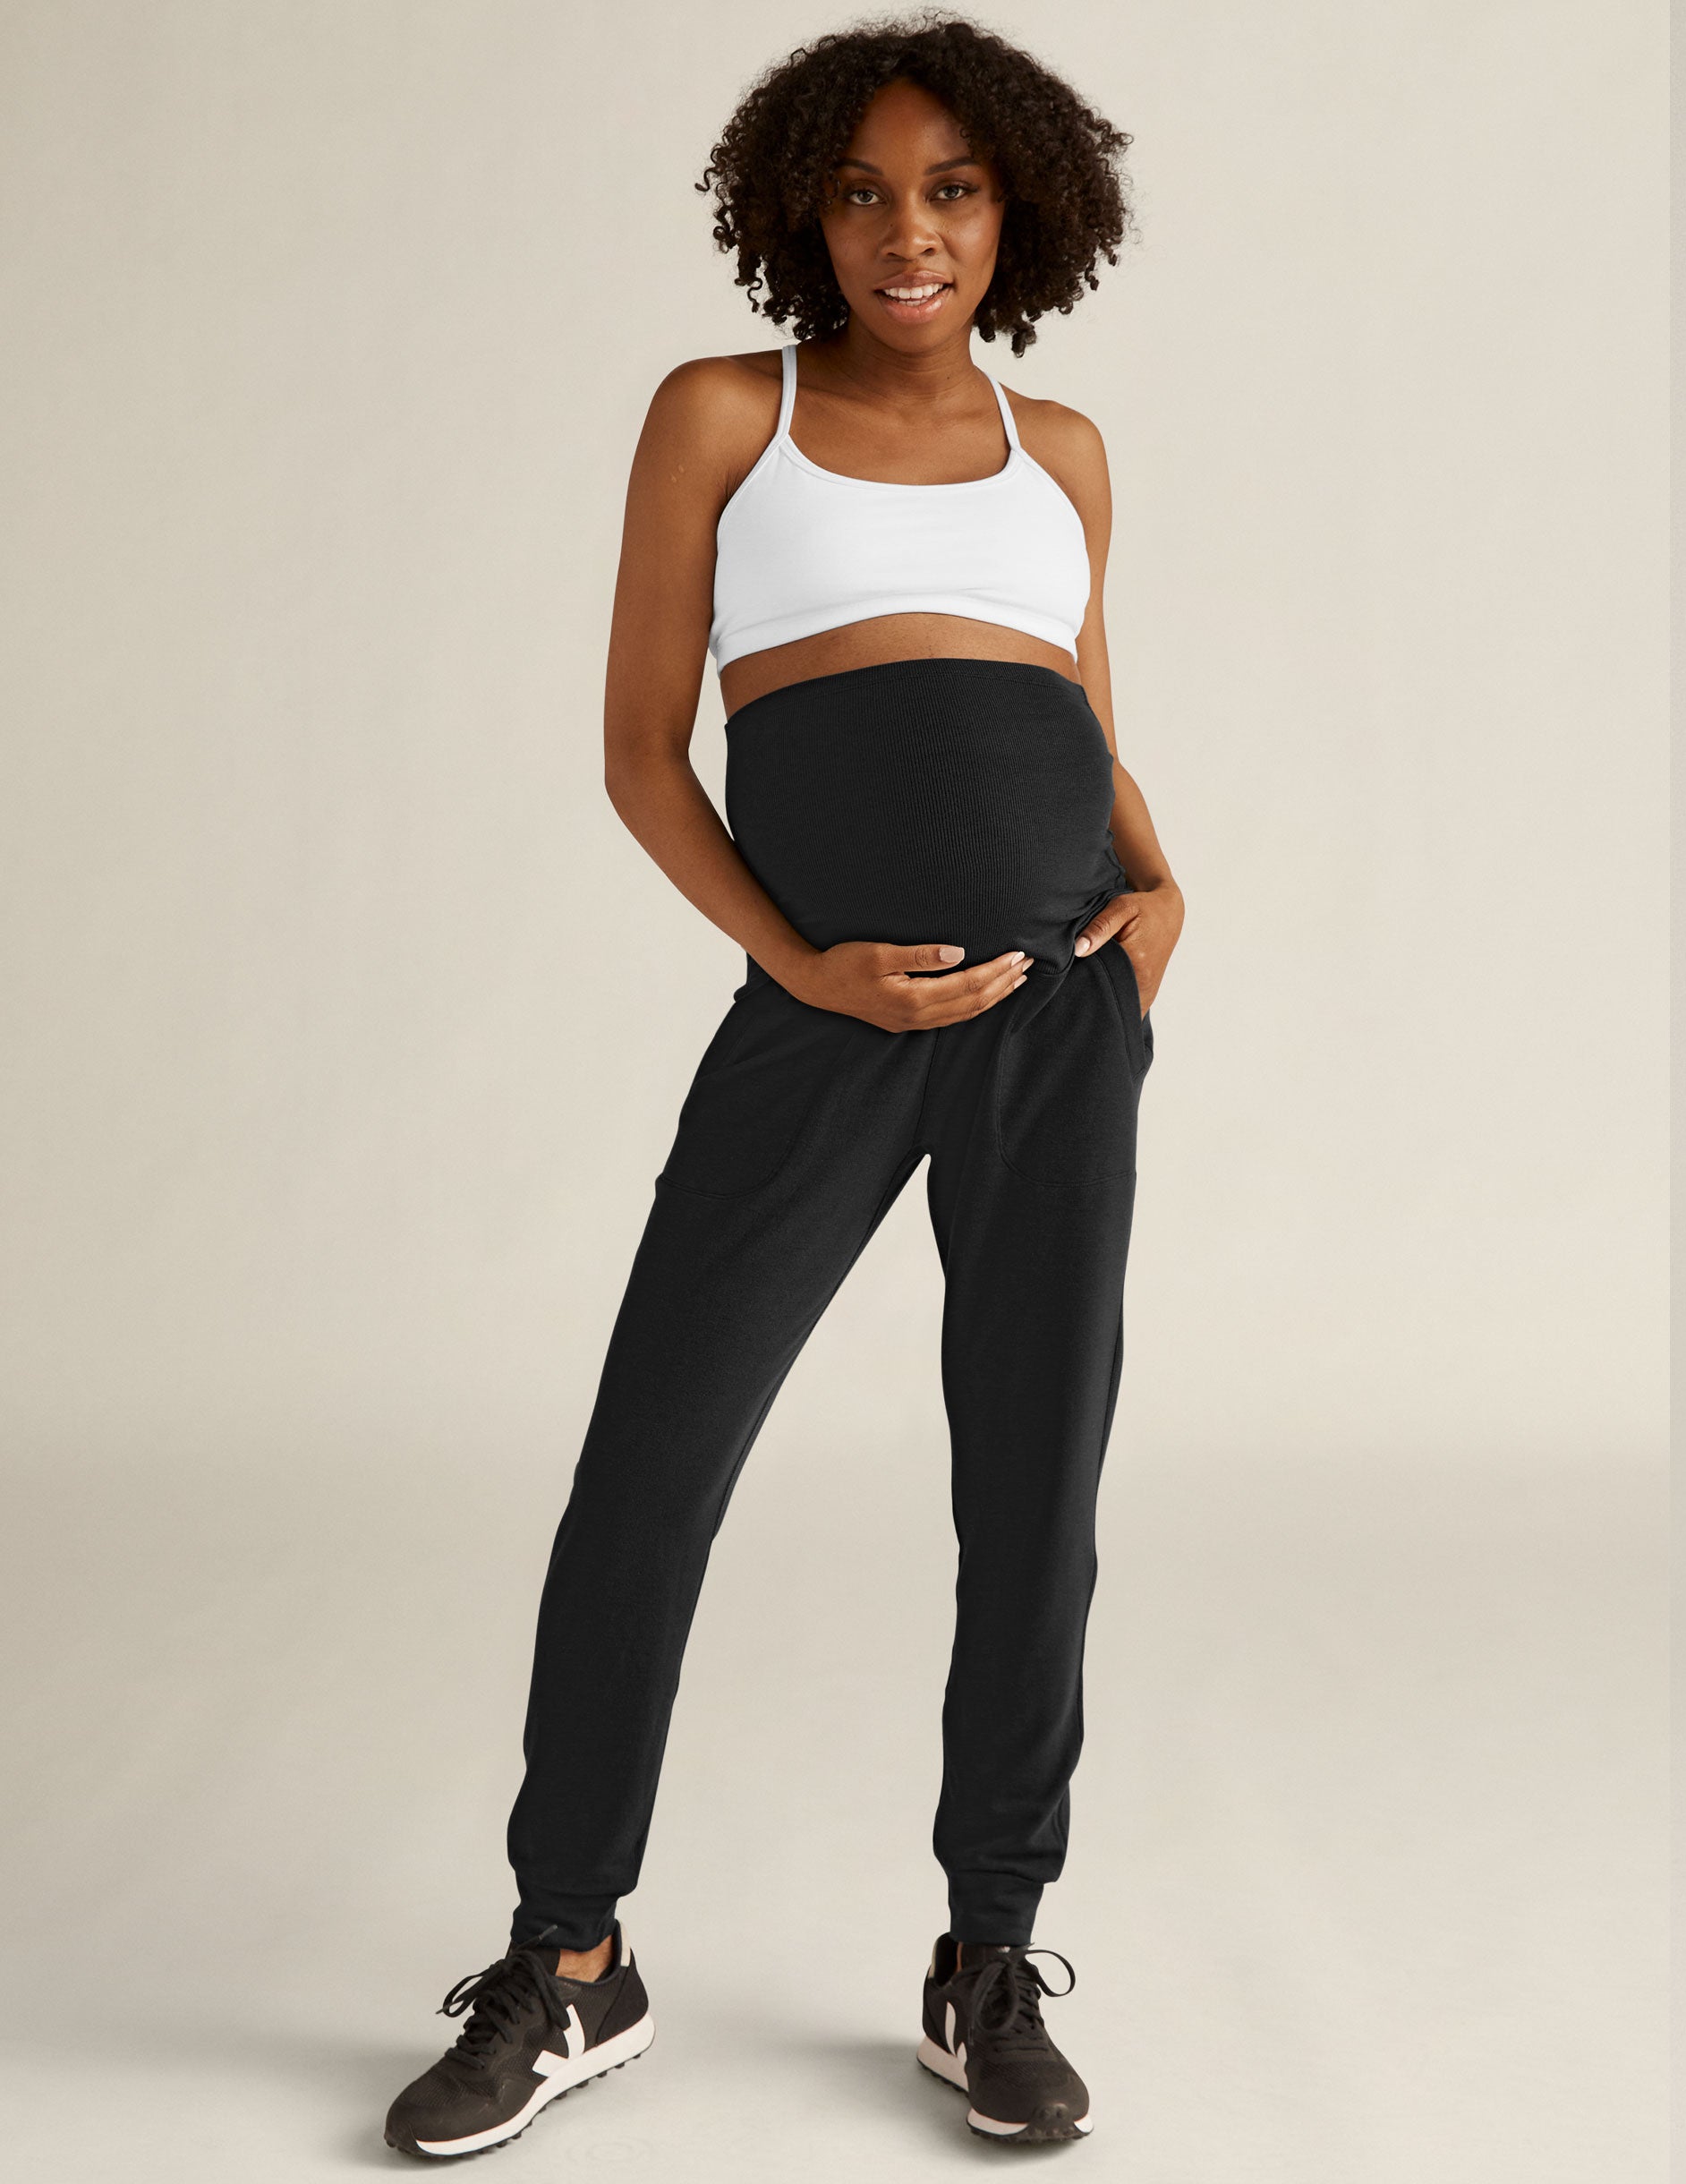 Black Maternity Sweatpant with Pockets